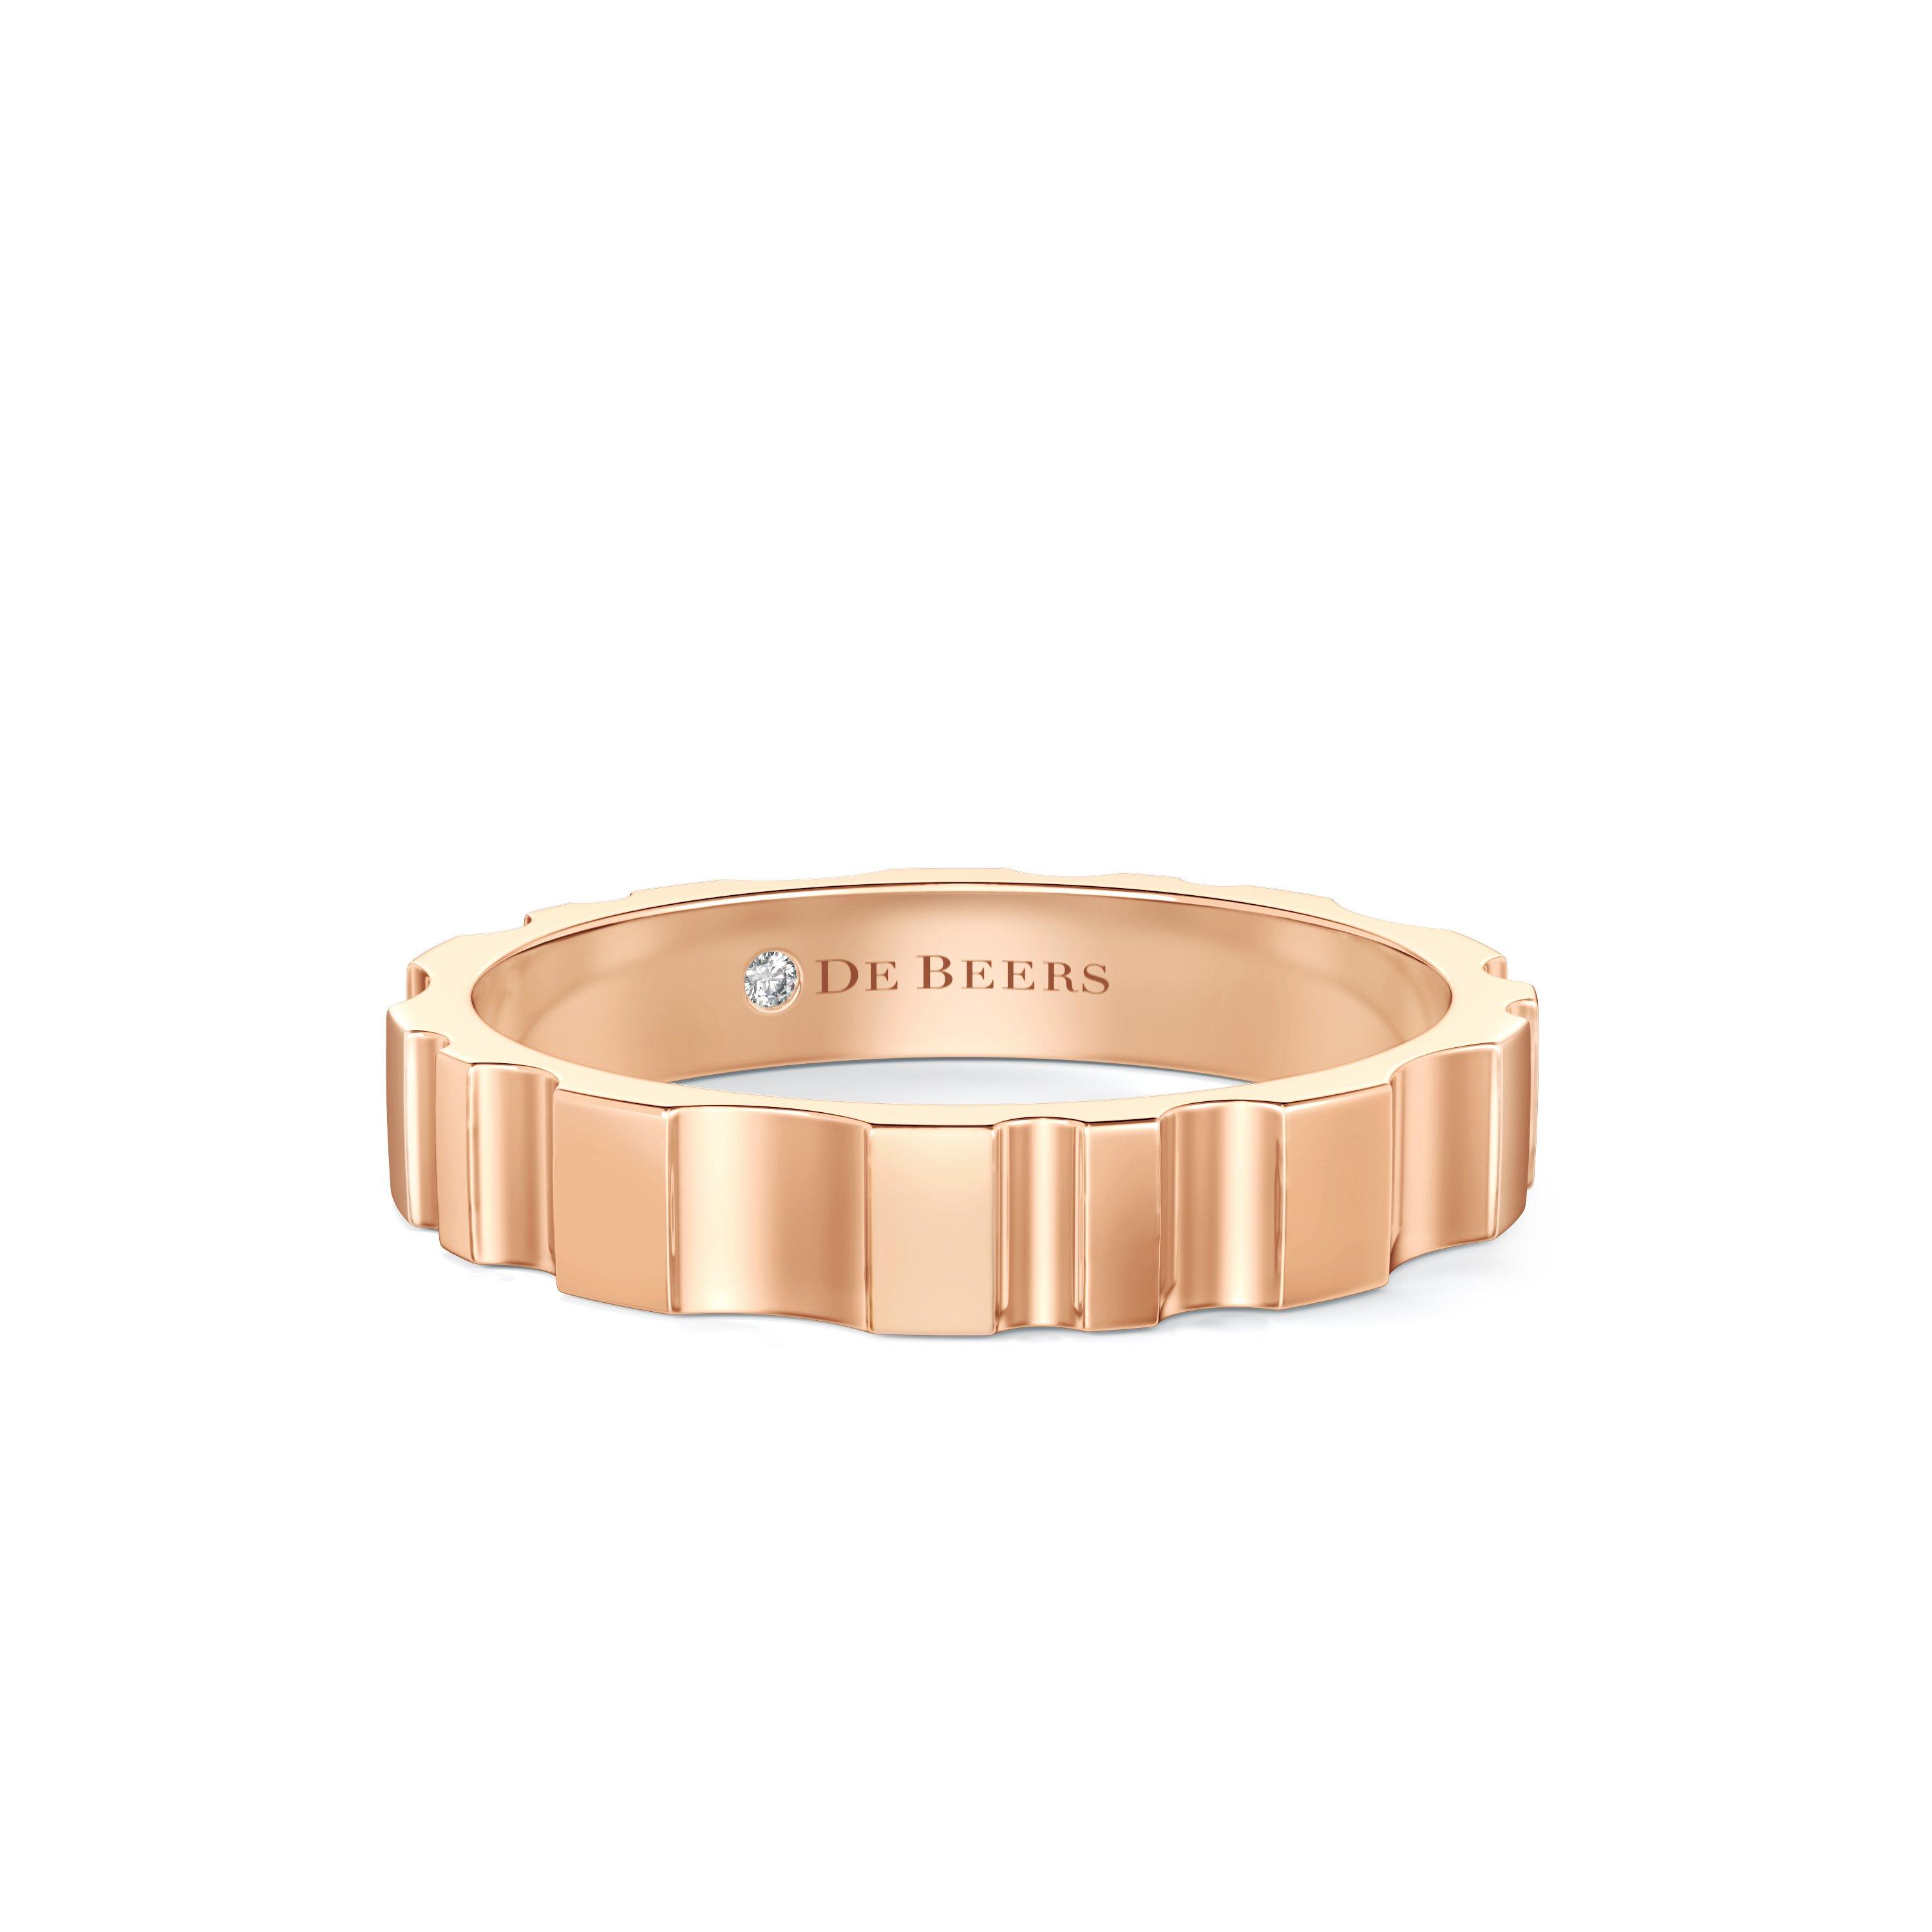 De Beers RVL Band Ring in Rose Gold, image 1